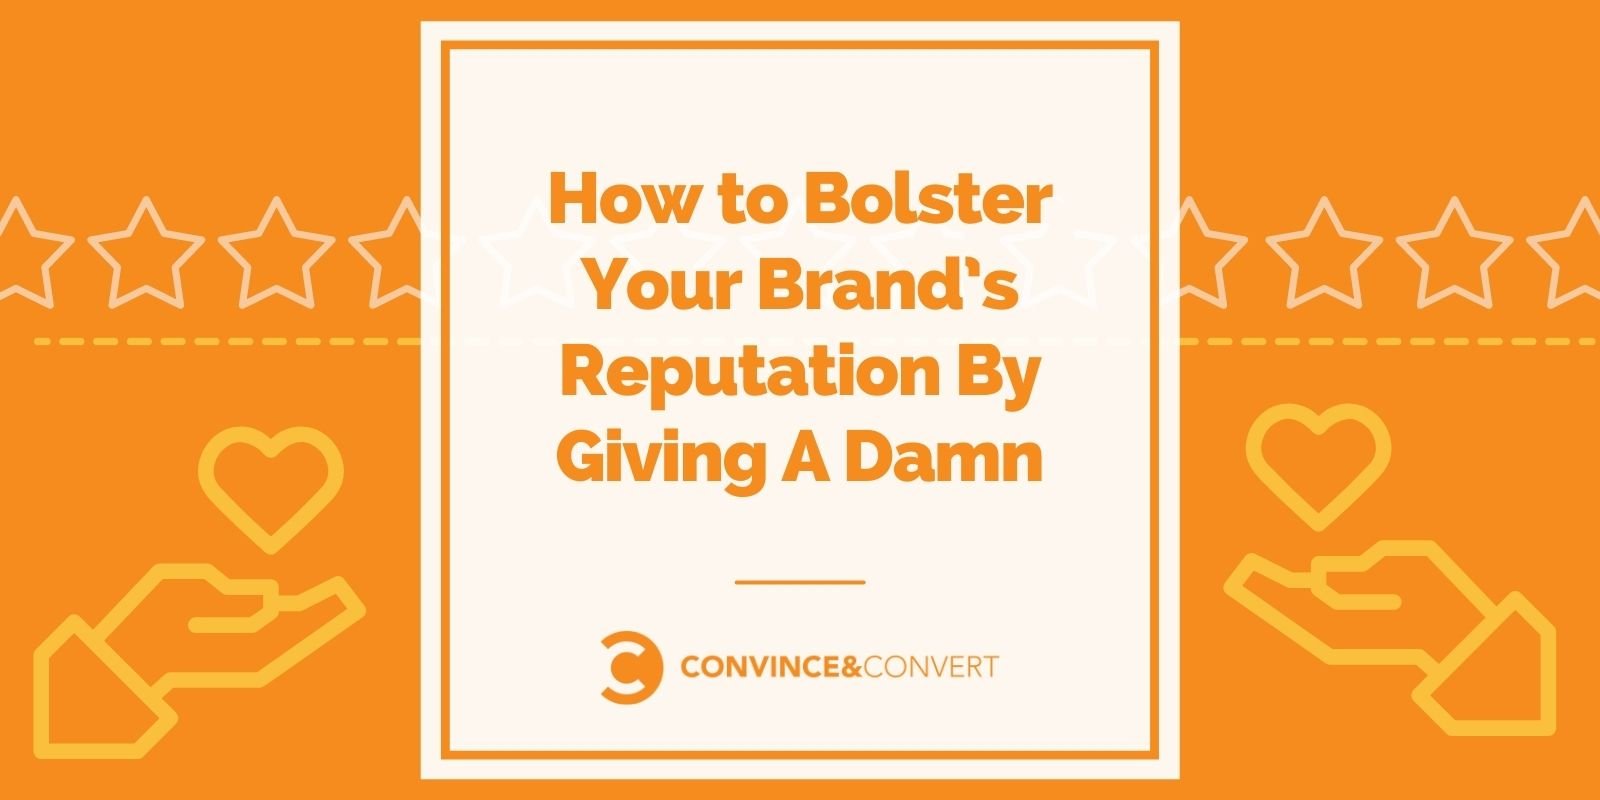 How to Bolster Your Designate’s Reputation By Giving A Damn